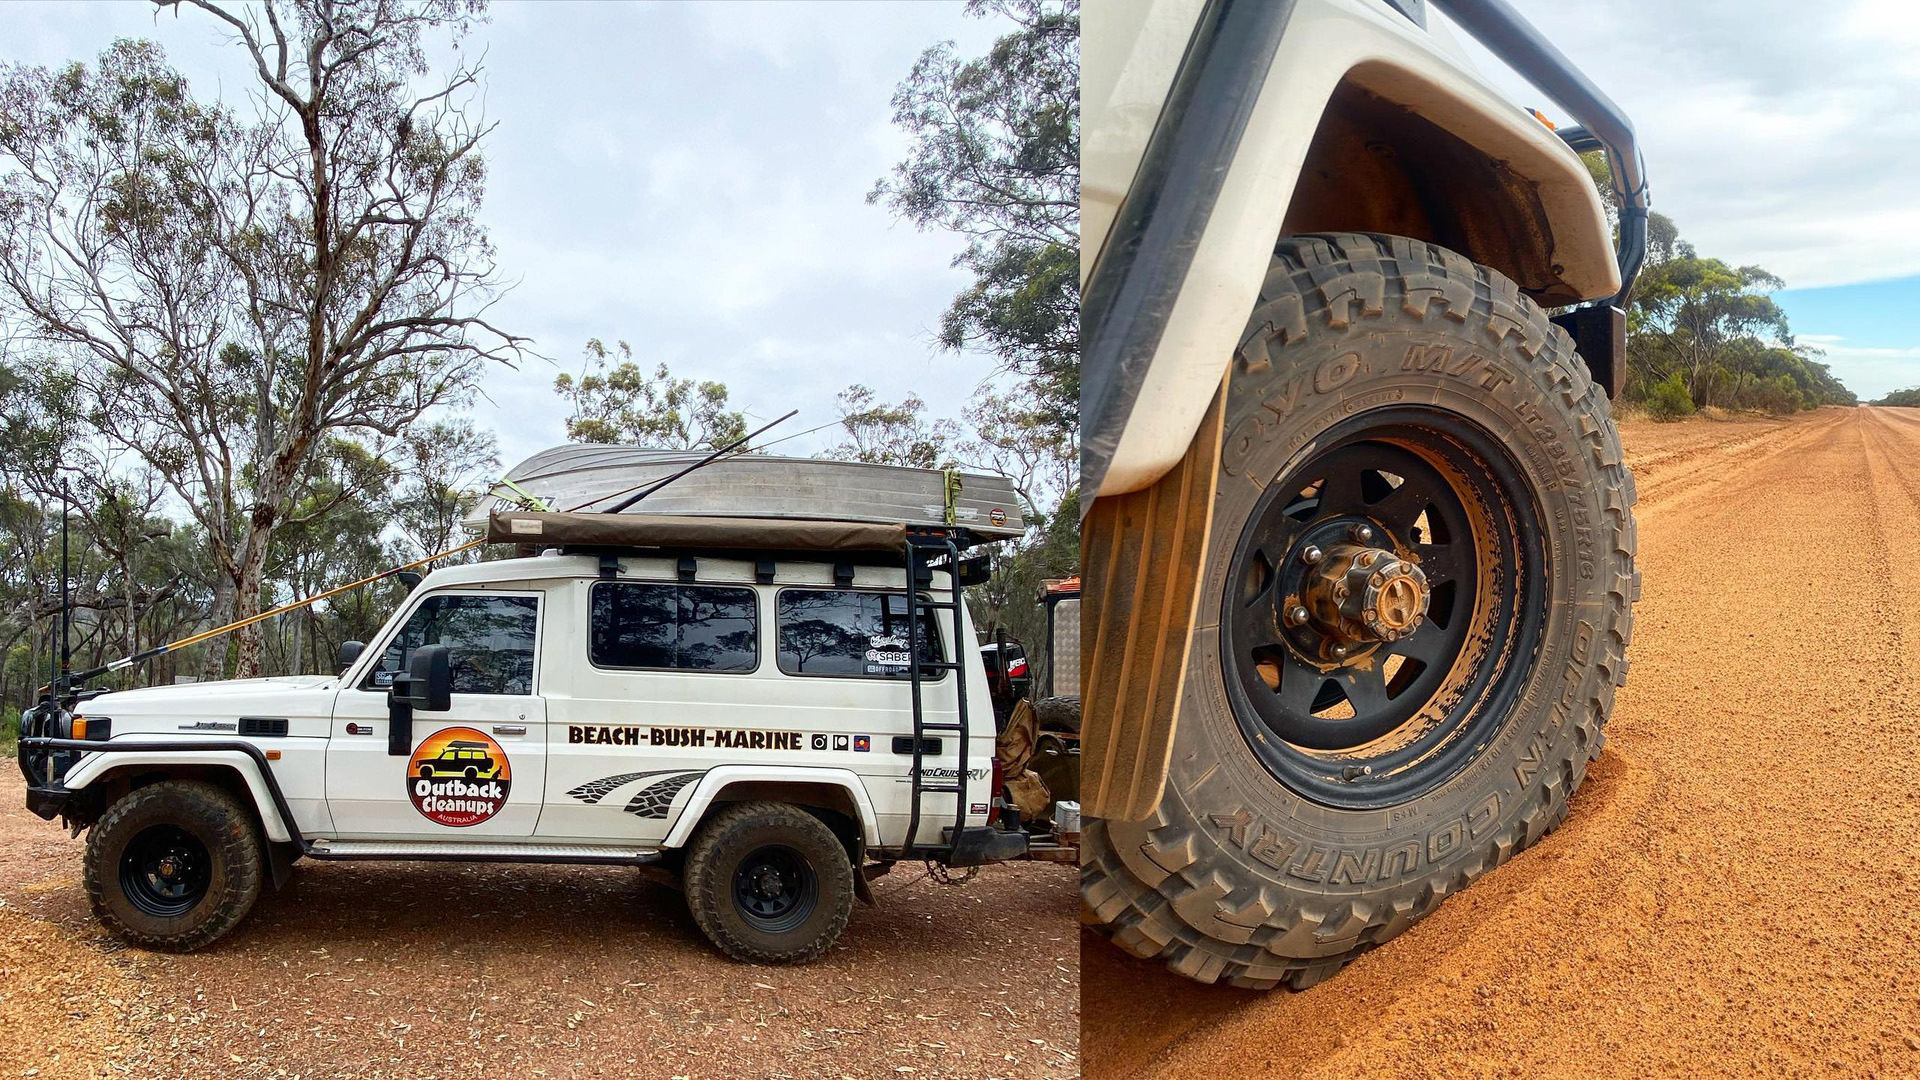 Outback Cleanups Australia Troopy with ROH Blak Trak Wheels